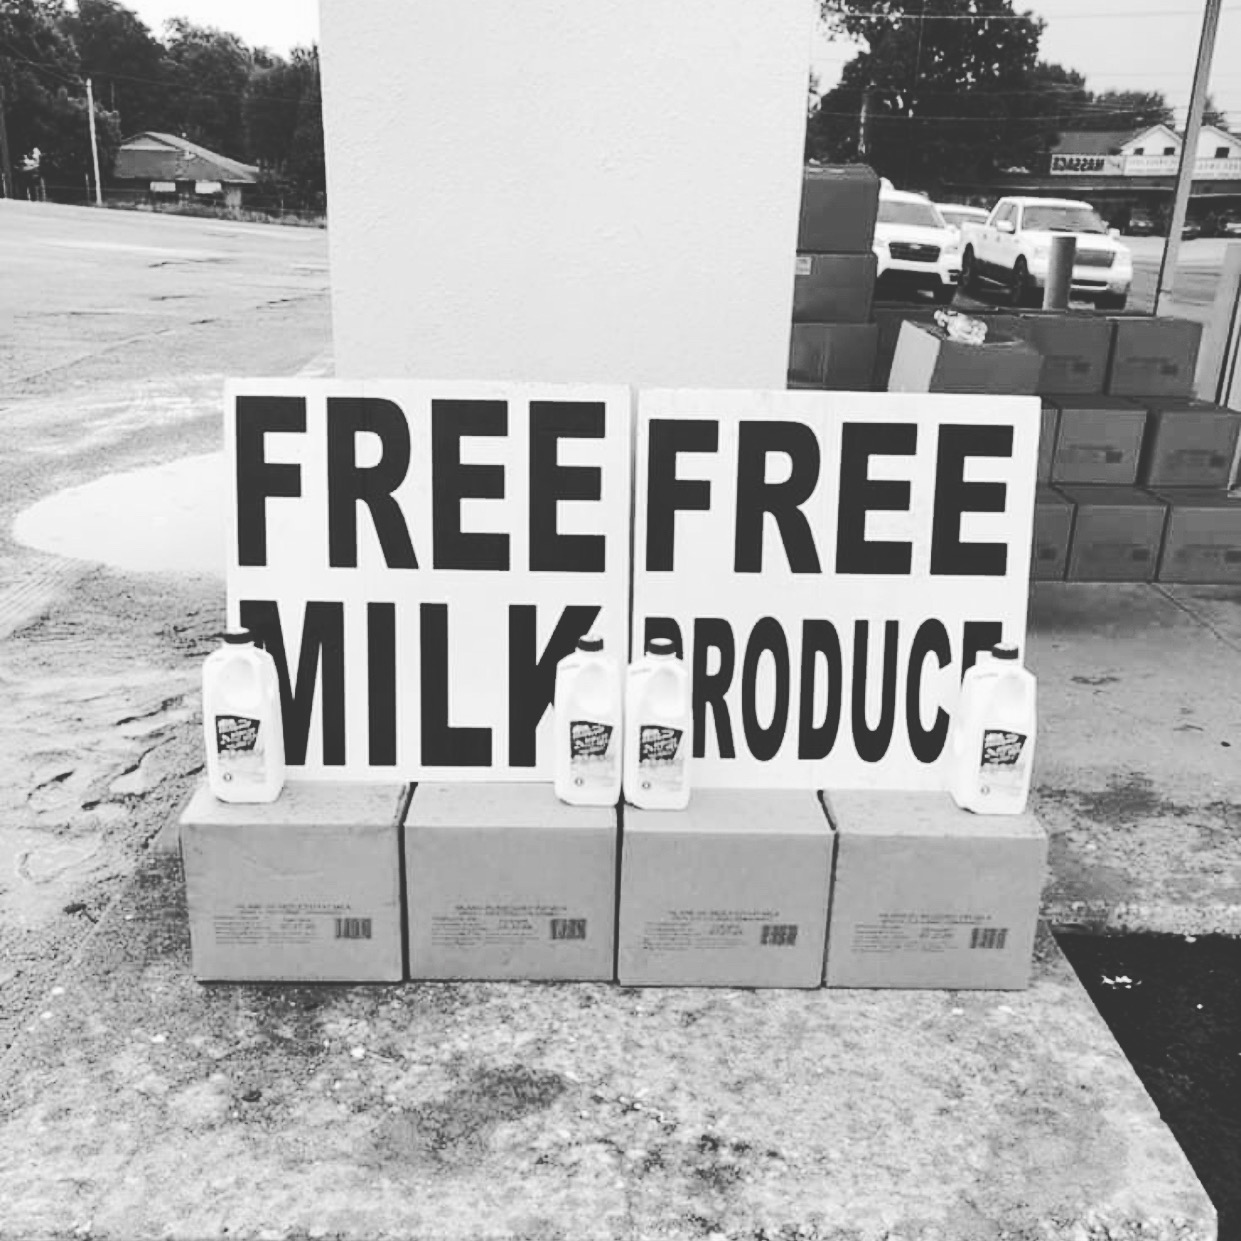 We are active is serving the community of West Tulsa by distributing free milk, produce, and meat each week to needy families.